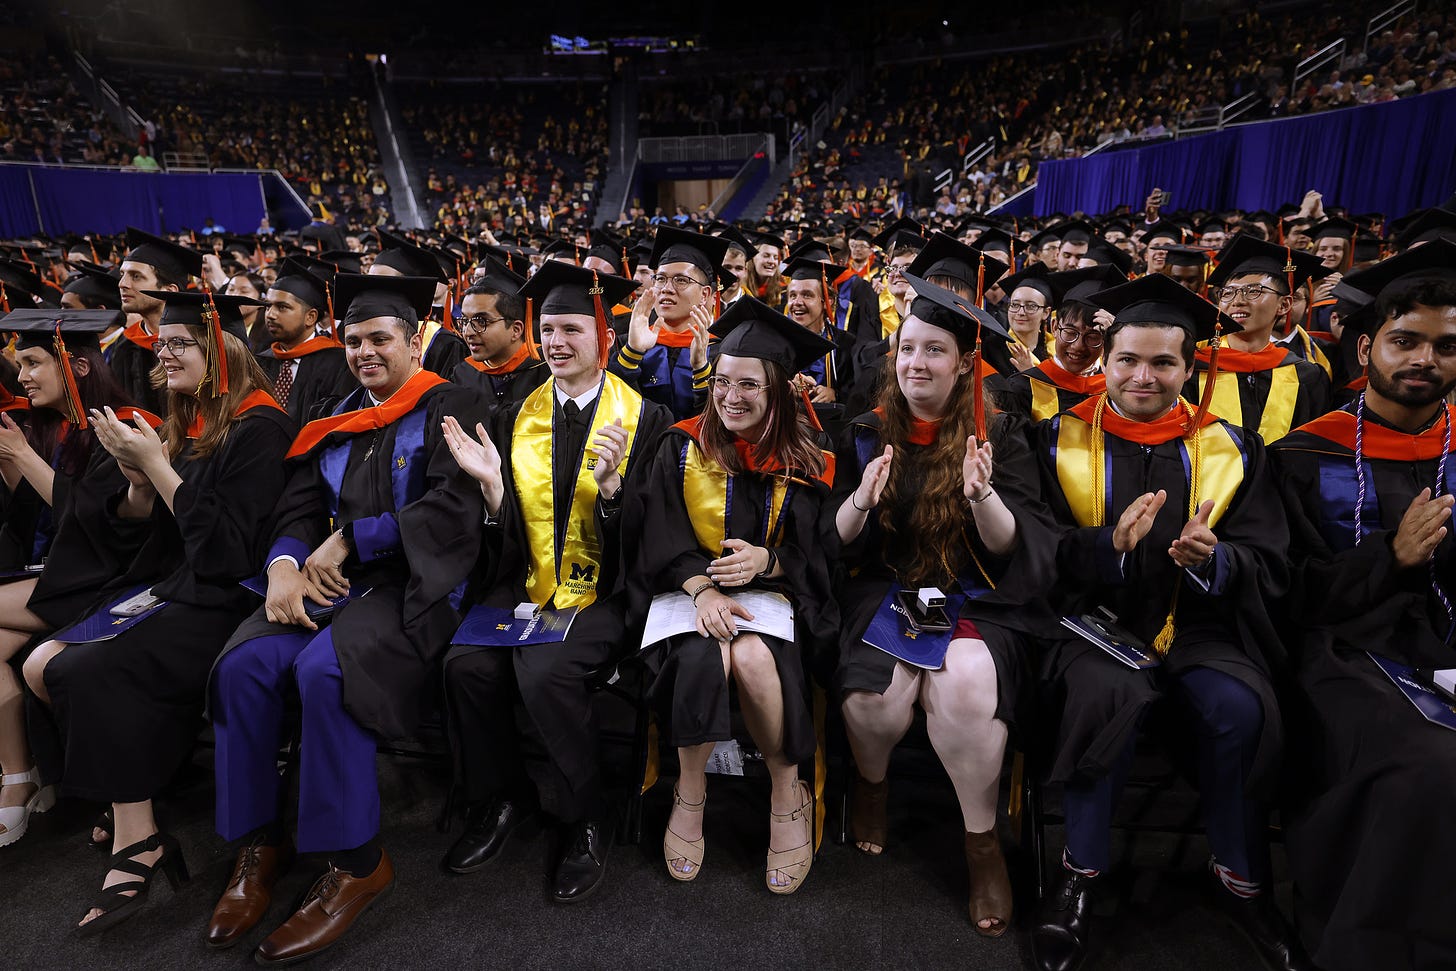 A row of graduates applaud and smile as a large crowd of other graduates fills the stands of a basketball arena.